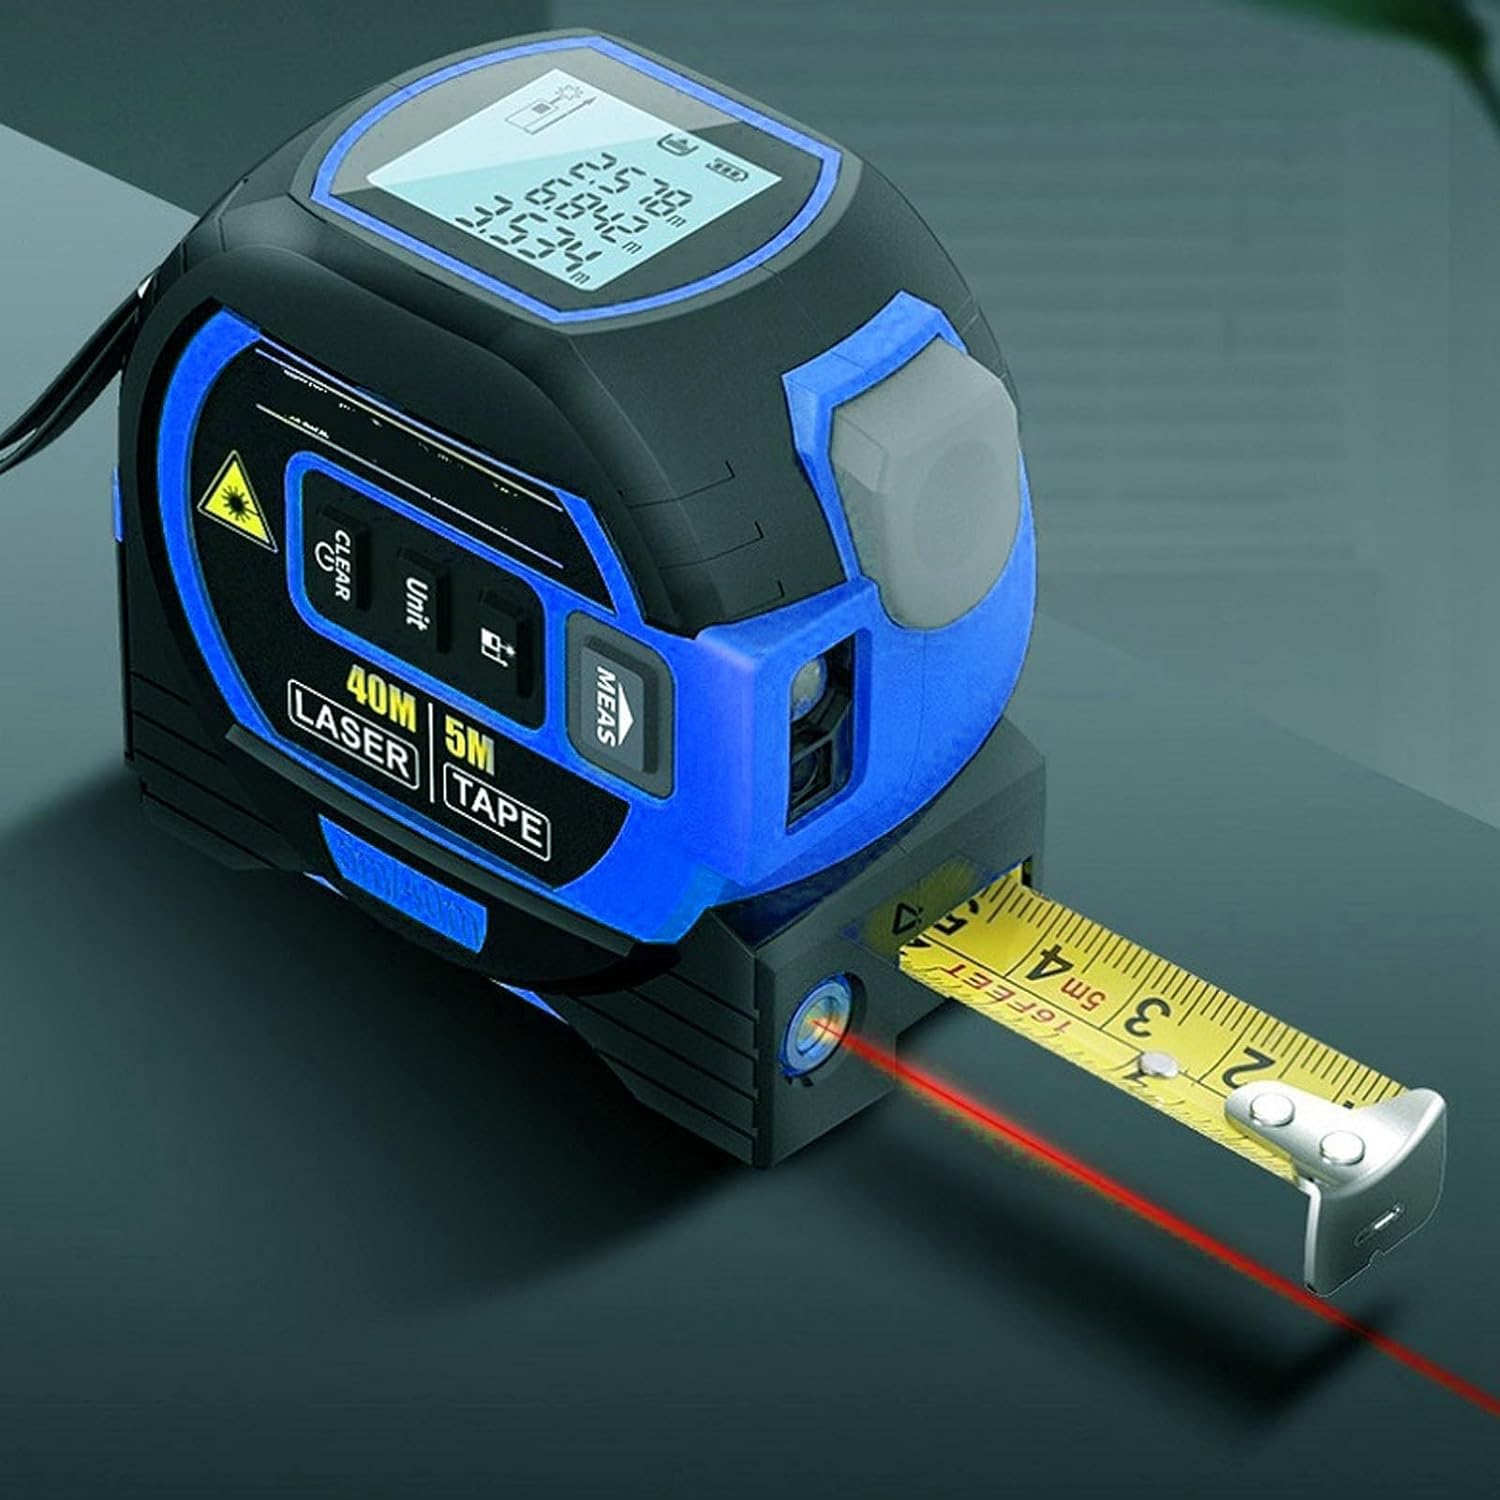 3 in 1 Dnce Measuring Tape Blue Digital Dnce Measuring Tape Supplier 